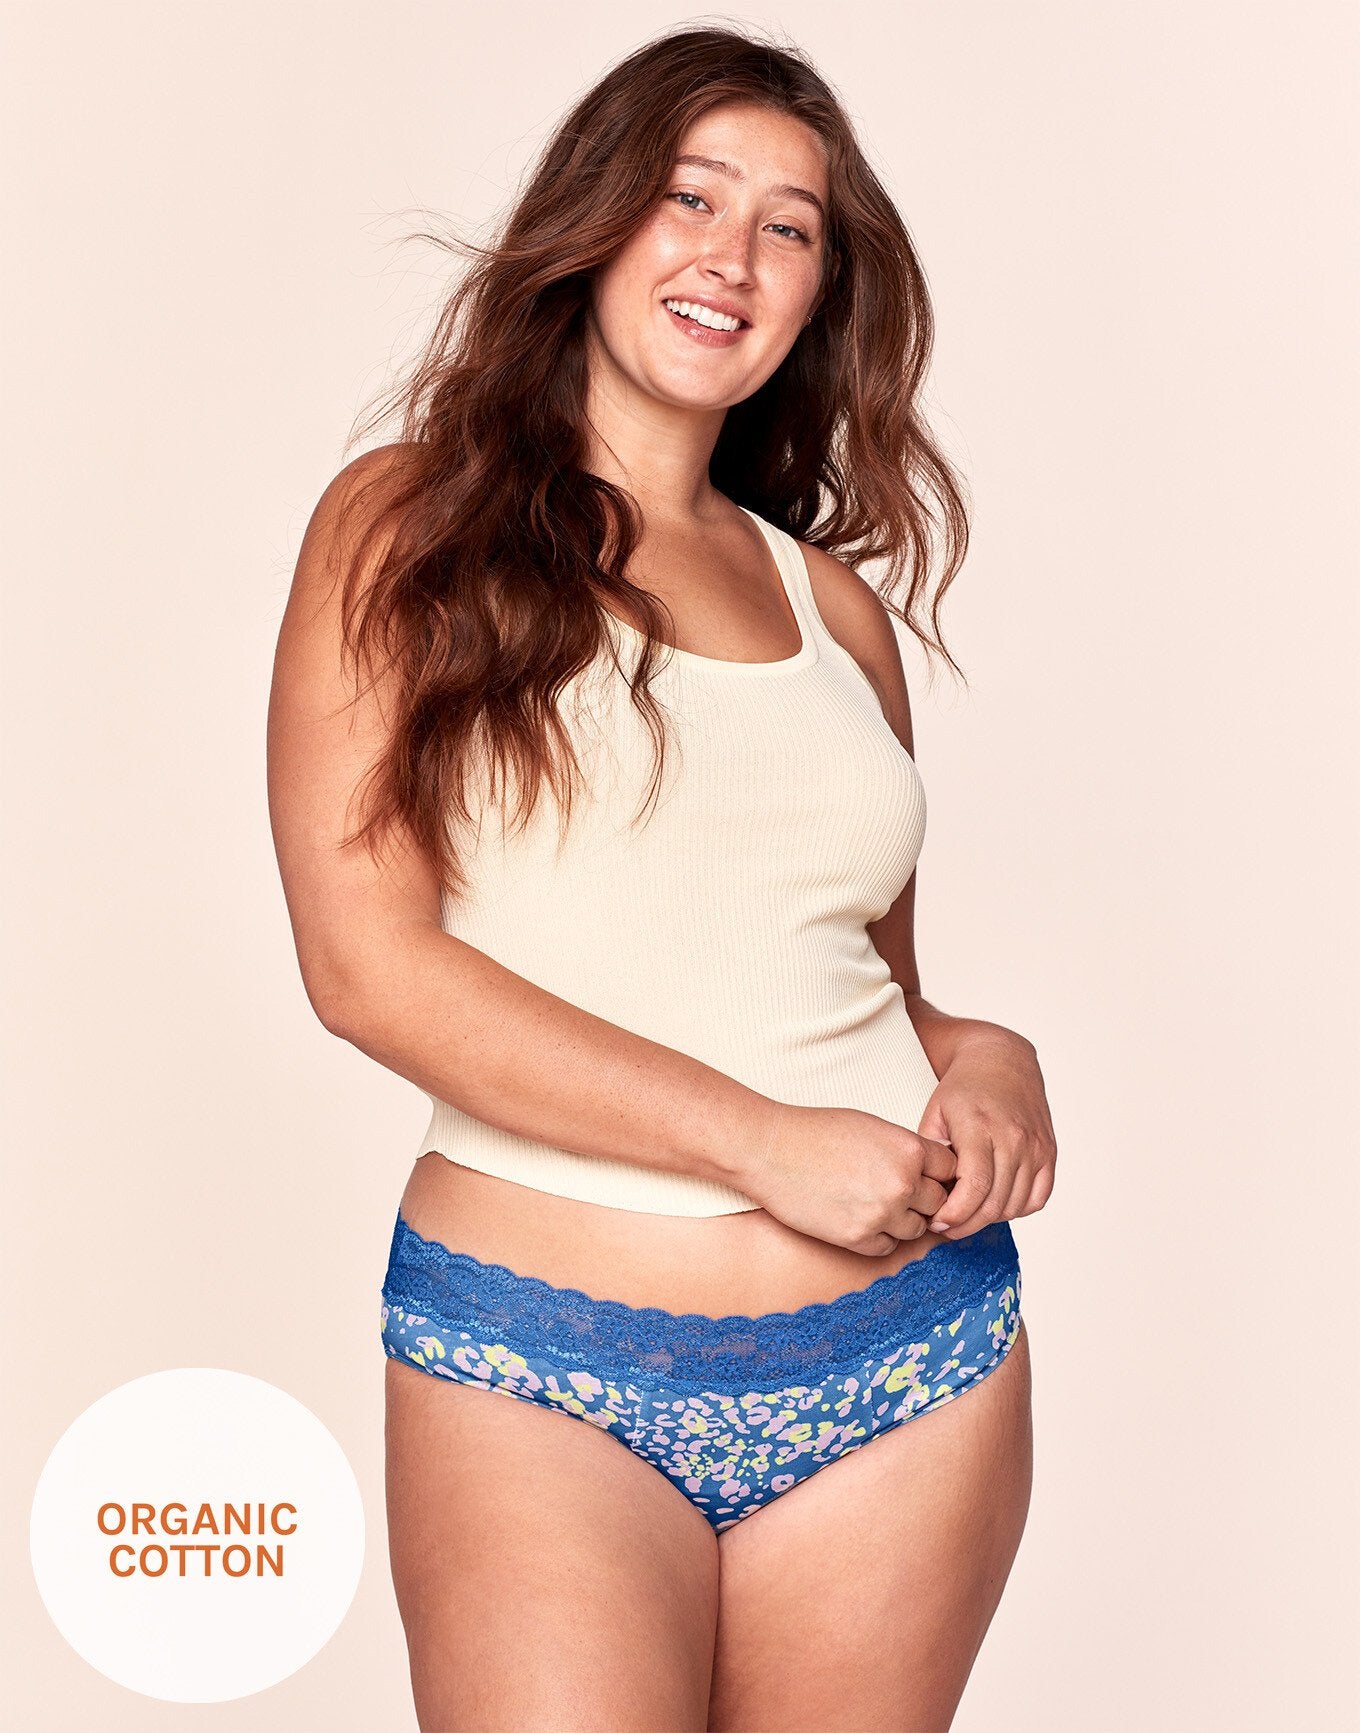 Depend Flexi Fit Inconvenience Underwear For Women(XL)80pcs in Ipaja -  Clothing, Alice Ijoma